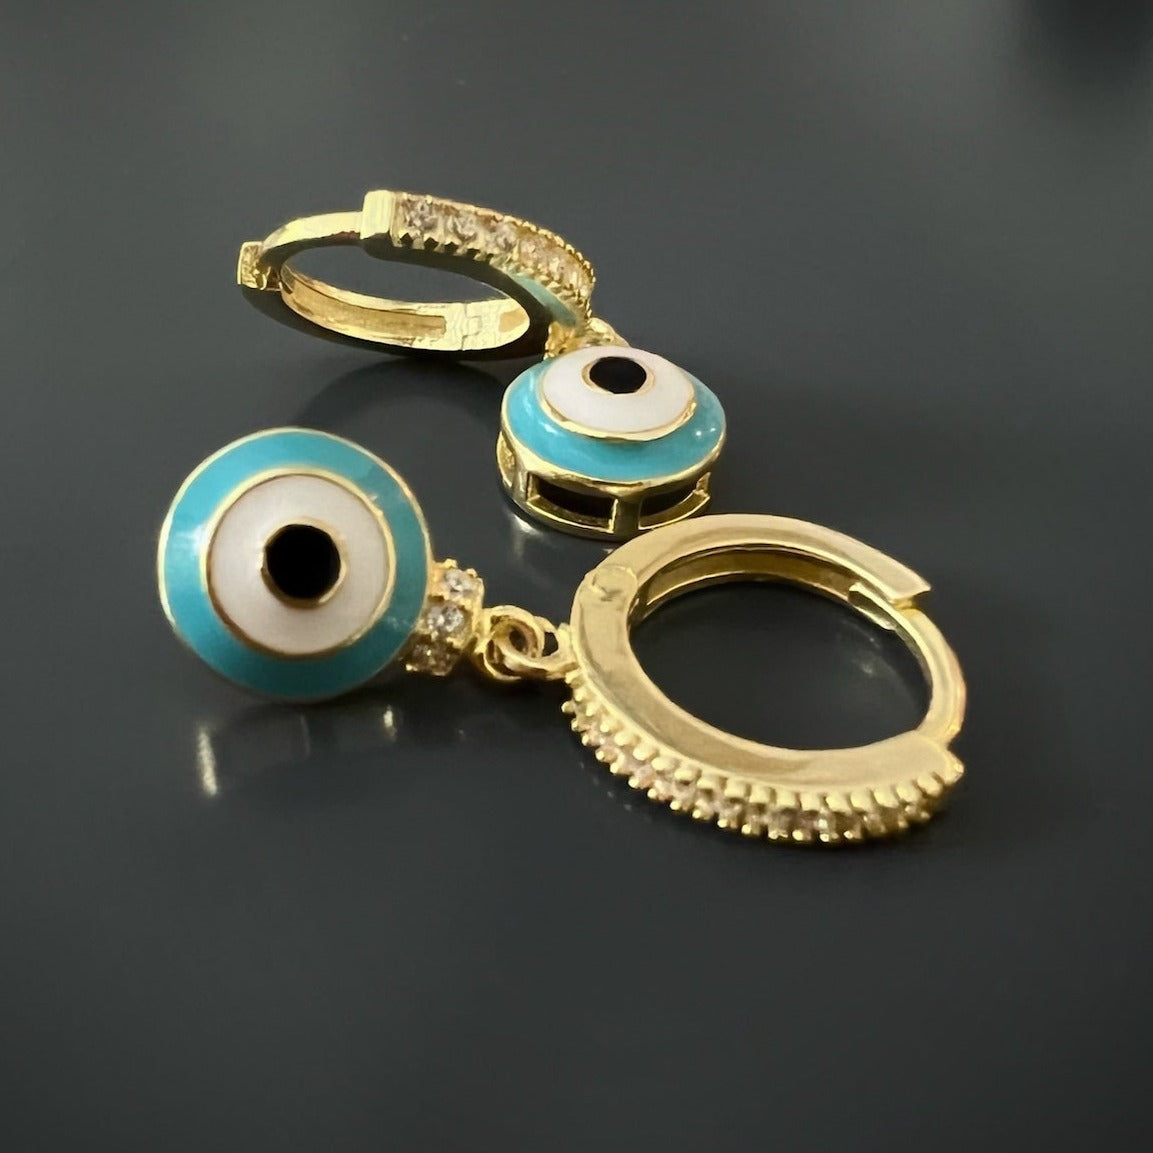 Gold-plated earrings with a symbolic turquoise evil eye charm